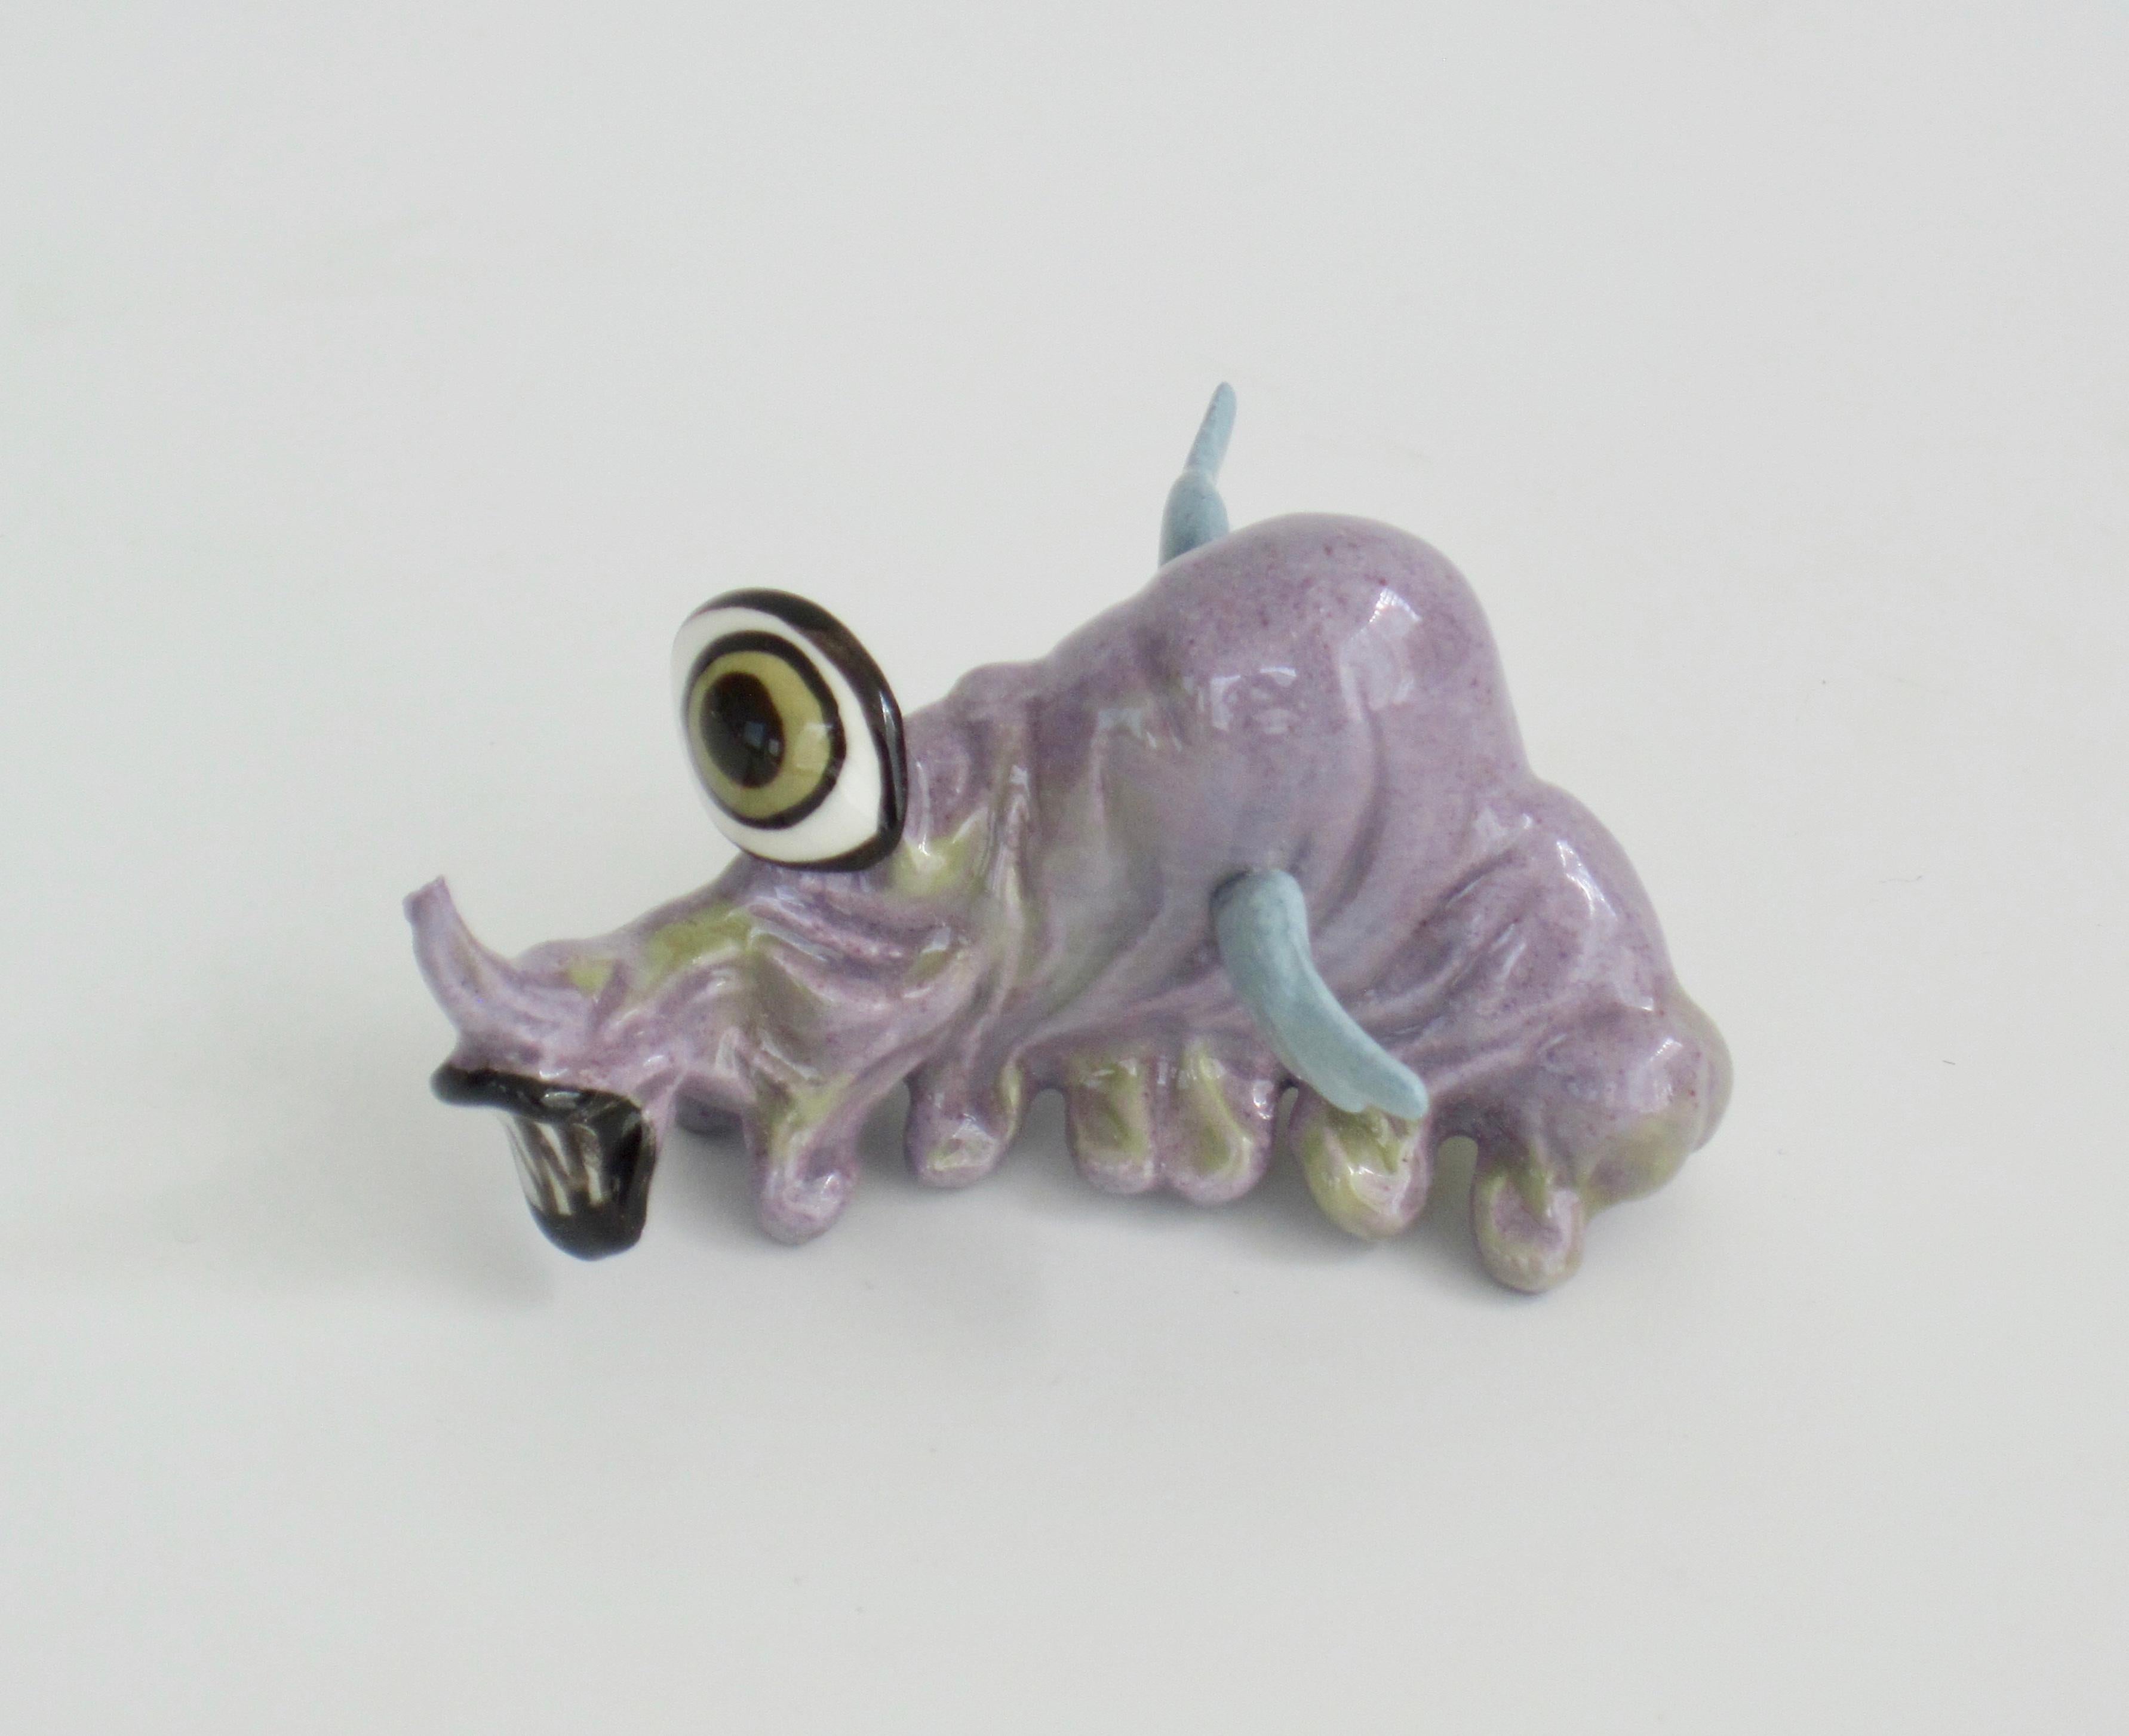 Designed by Nell Bortells for Hagen-Renaker Pottery, Little Horribles were a group of diminutive ghoulish characters only made in 1958 and 1959. 
Earthman #405, is also known as The Purple People Eater with the 